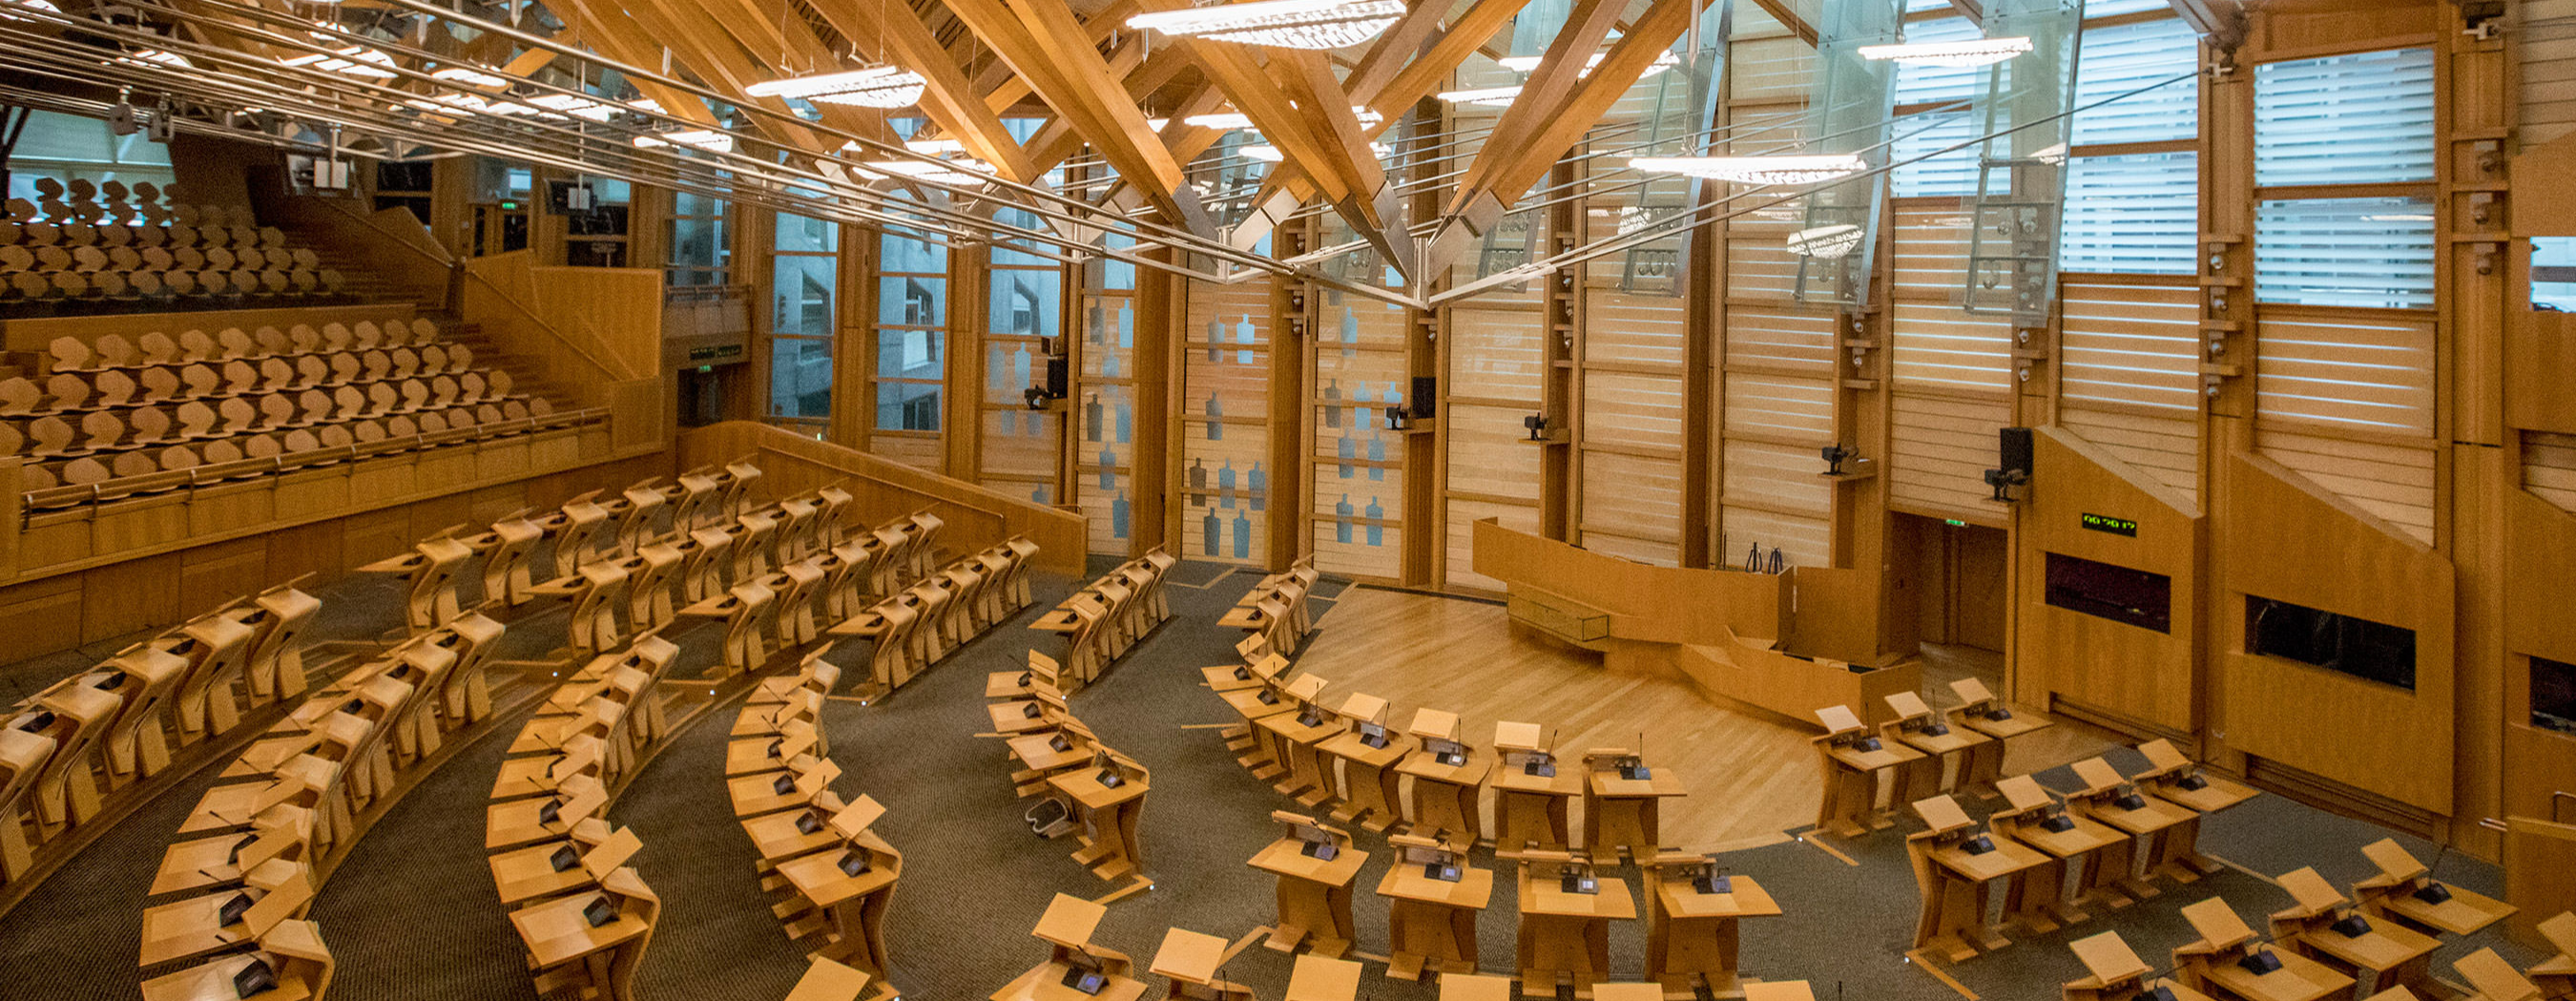 A photo of the debating chamber inside the Scottish Parliament.